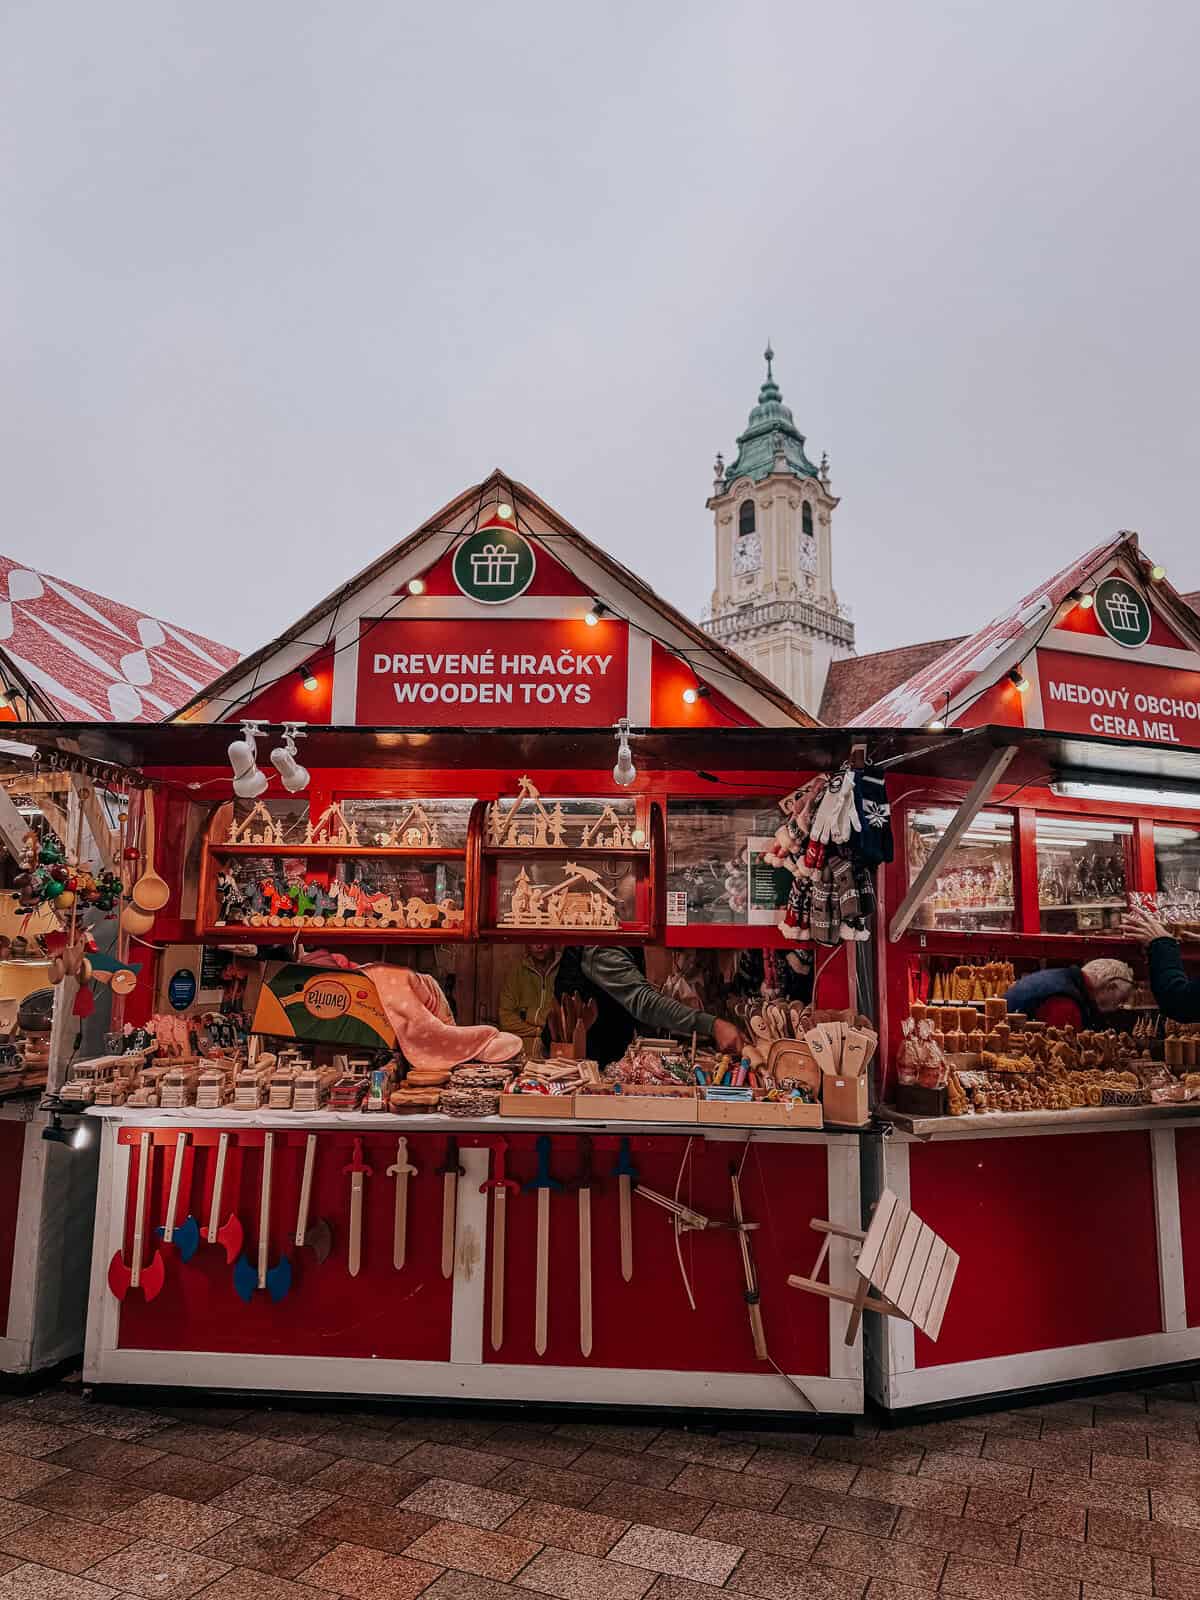 A festive market scene with wooden toy stalls, red roofs, and Christmas decorations, with a tower visible in the background.